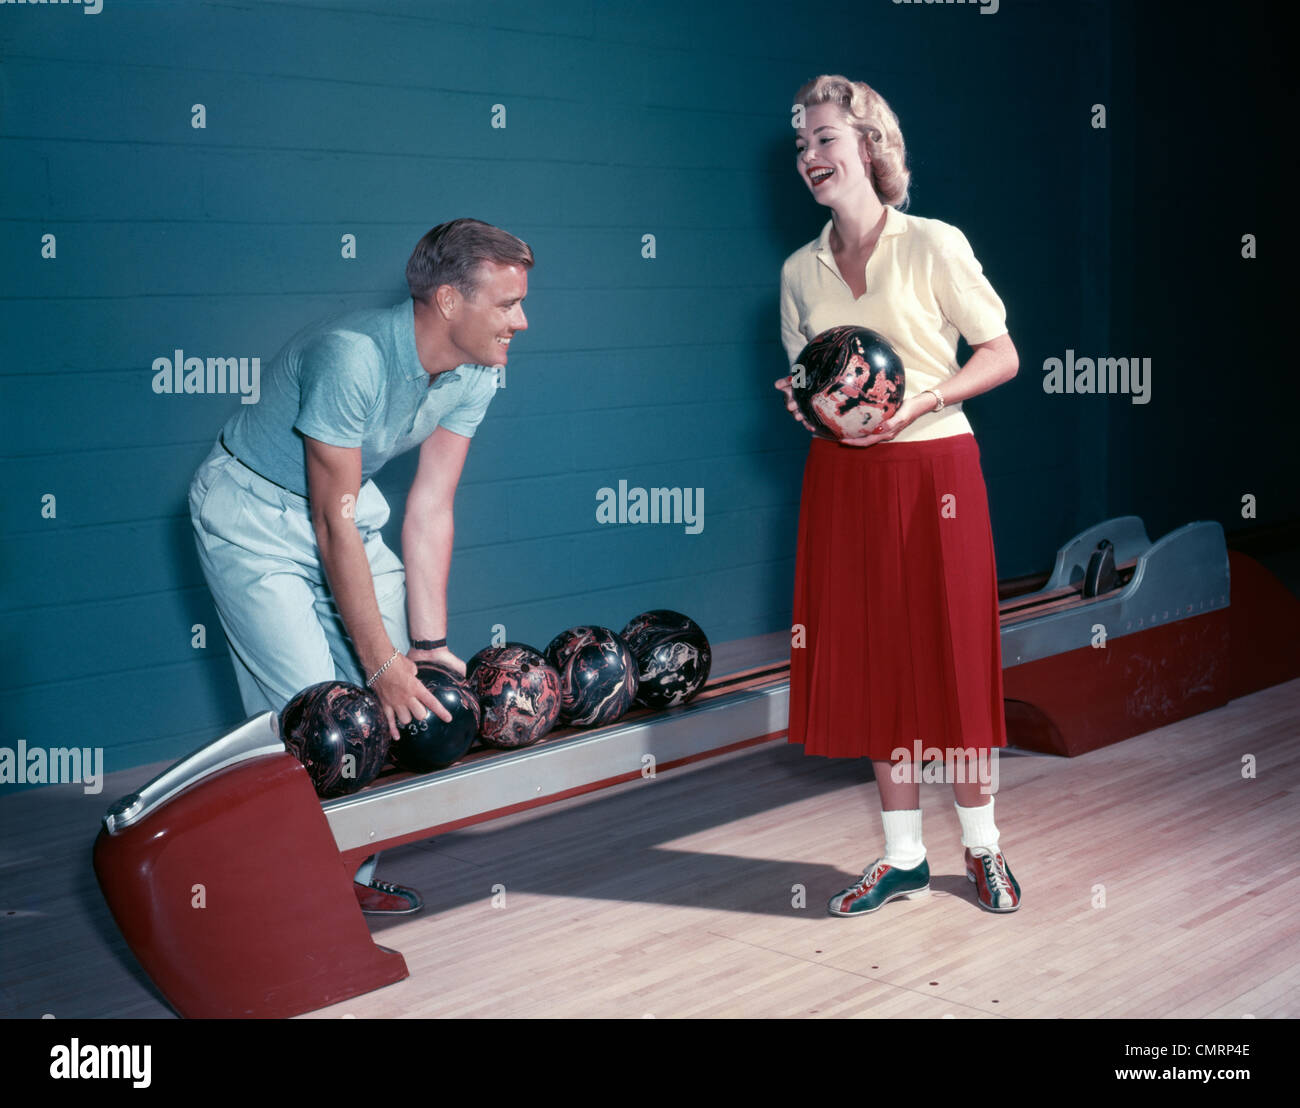 SMILING COUPLE HUSBAND WIFE BOWLING INDOOR 1950s Stock Photo